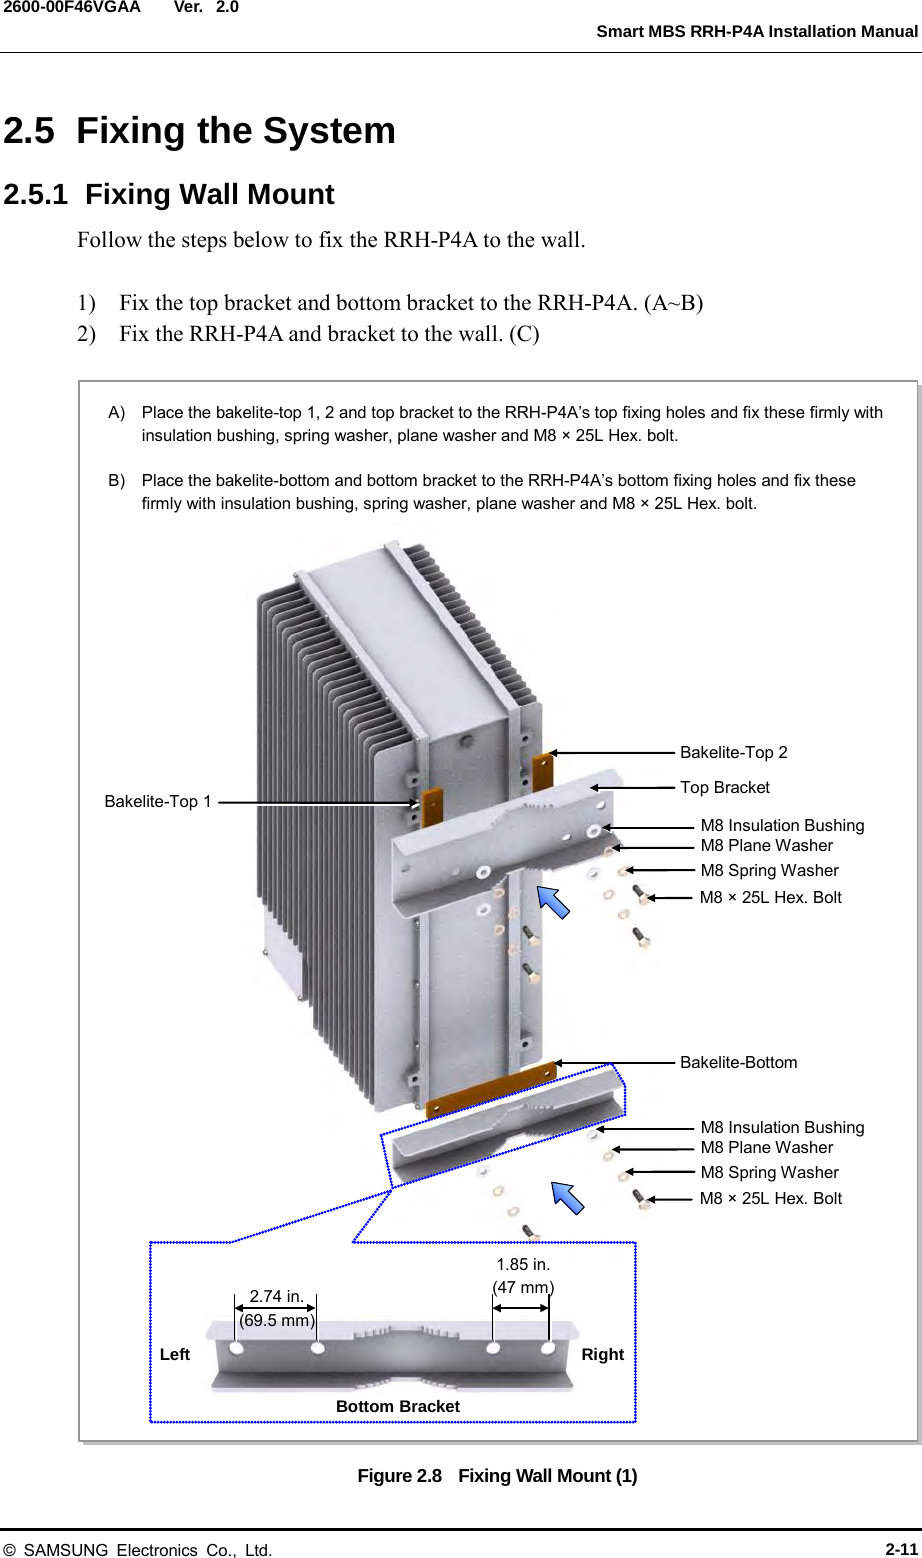  Ver.   Smart MBS RRH-P4A Installation Manual 2600-00F46VGAA 2.0 2.5  Fixing the System 2.5.1 Fixing Wall Mount Follow the steps below to fix the RRH-P4A to the wall.  1)  Fix the top bracket and bottom bracket to the RRH-P4A. (A~B) 2)  Fix the RRH-P4A and bracket to the wall. (C)  Figure 2.8  Fixing Wall Mount (1) A)  Place the bakelite-top 1, 2 and top bracket to the RRH-P4A’s top fixing holes and fix these firmly with insulation bushing, spring washer, plane washer and M8 × 25L Hex. bolt.  B)  Place the bakelite-bottom and bottom bracket to the RRH-P4A’s bottom fixing holes and fix these firmly with insulation bushing, spring washer, plane washer and M8 × 25L Hex. bolt. M8 × 25L Hex. Bolt M8 Plane Washer Top Bracket  M8 Spring Washer M8 Insulation Bushing Bakelite-Bottom Bakelite-Top 1 M8 × 25L Hex. Bolt M8 Plane Washer M8 Spring Washer M8 Insulation Bushing  2.74 in. (69.5 mm) 1.85 in. (47 mm) Left Right Bakelite-Top 2 Bottom Bracket © SAMSUNG Electronics Co., Ltd. 2-11 